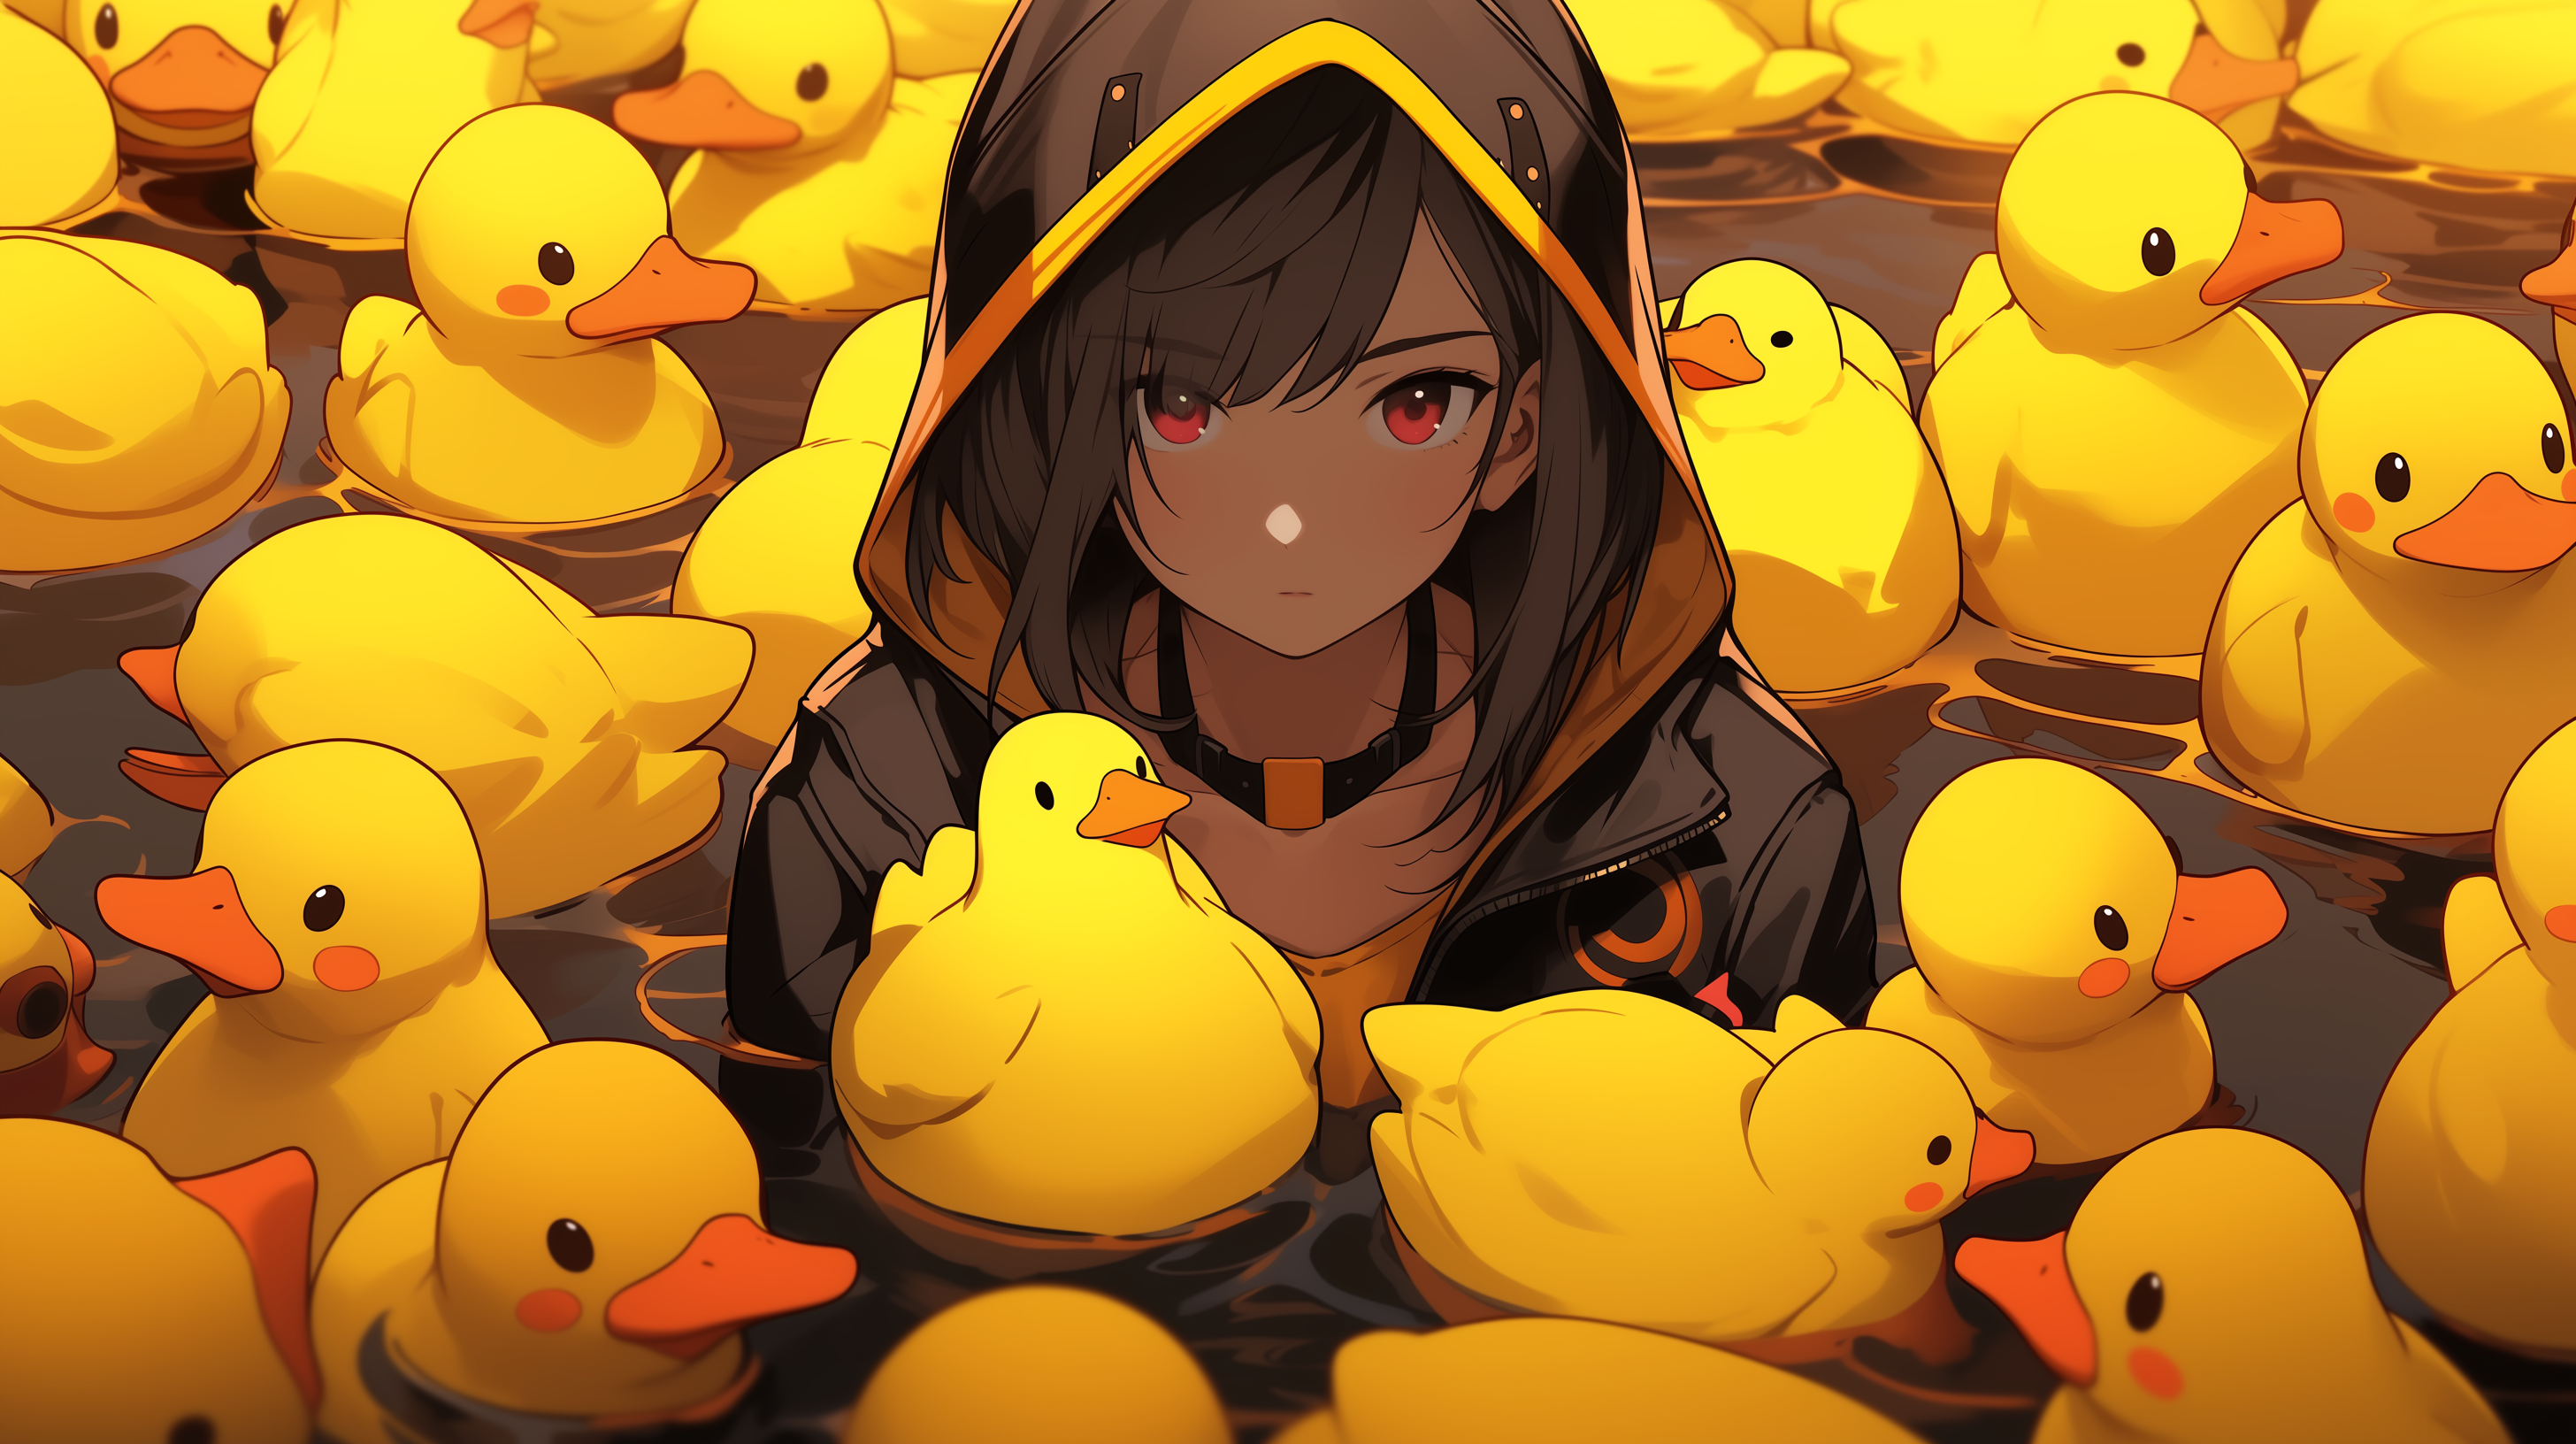 Banstra humanoid character with duck features , japanese anime |  imgcreator.zmo.ai